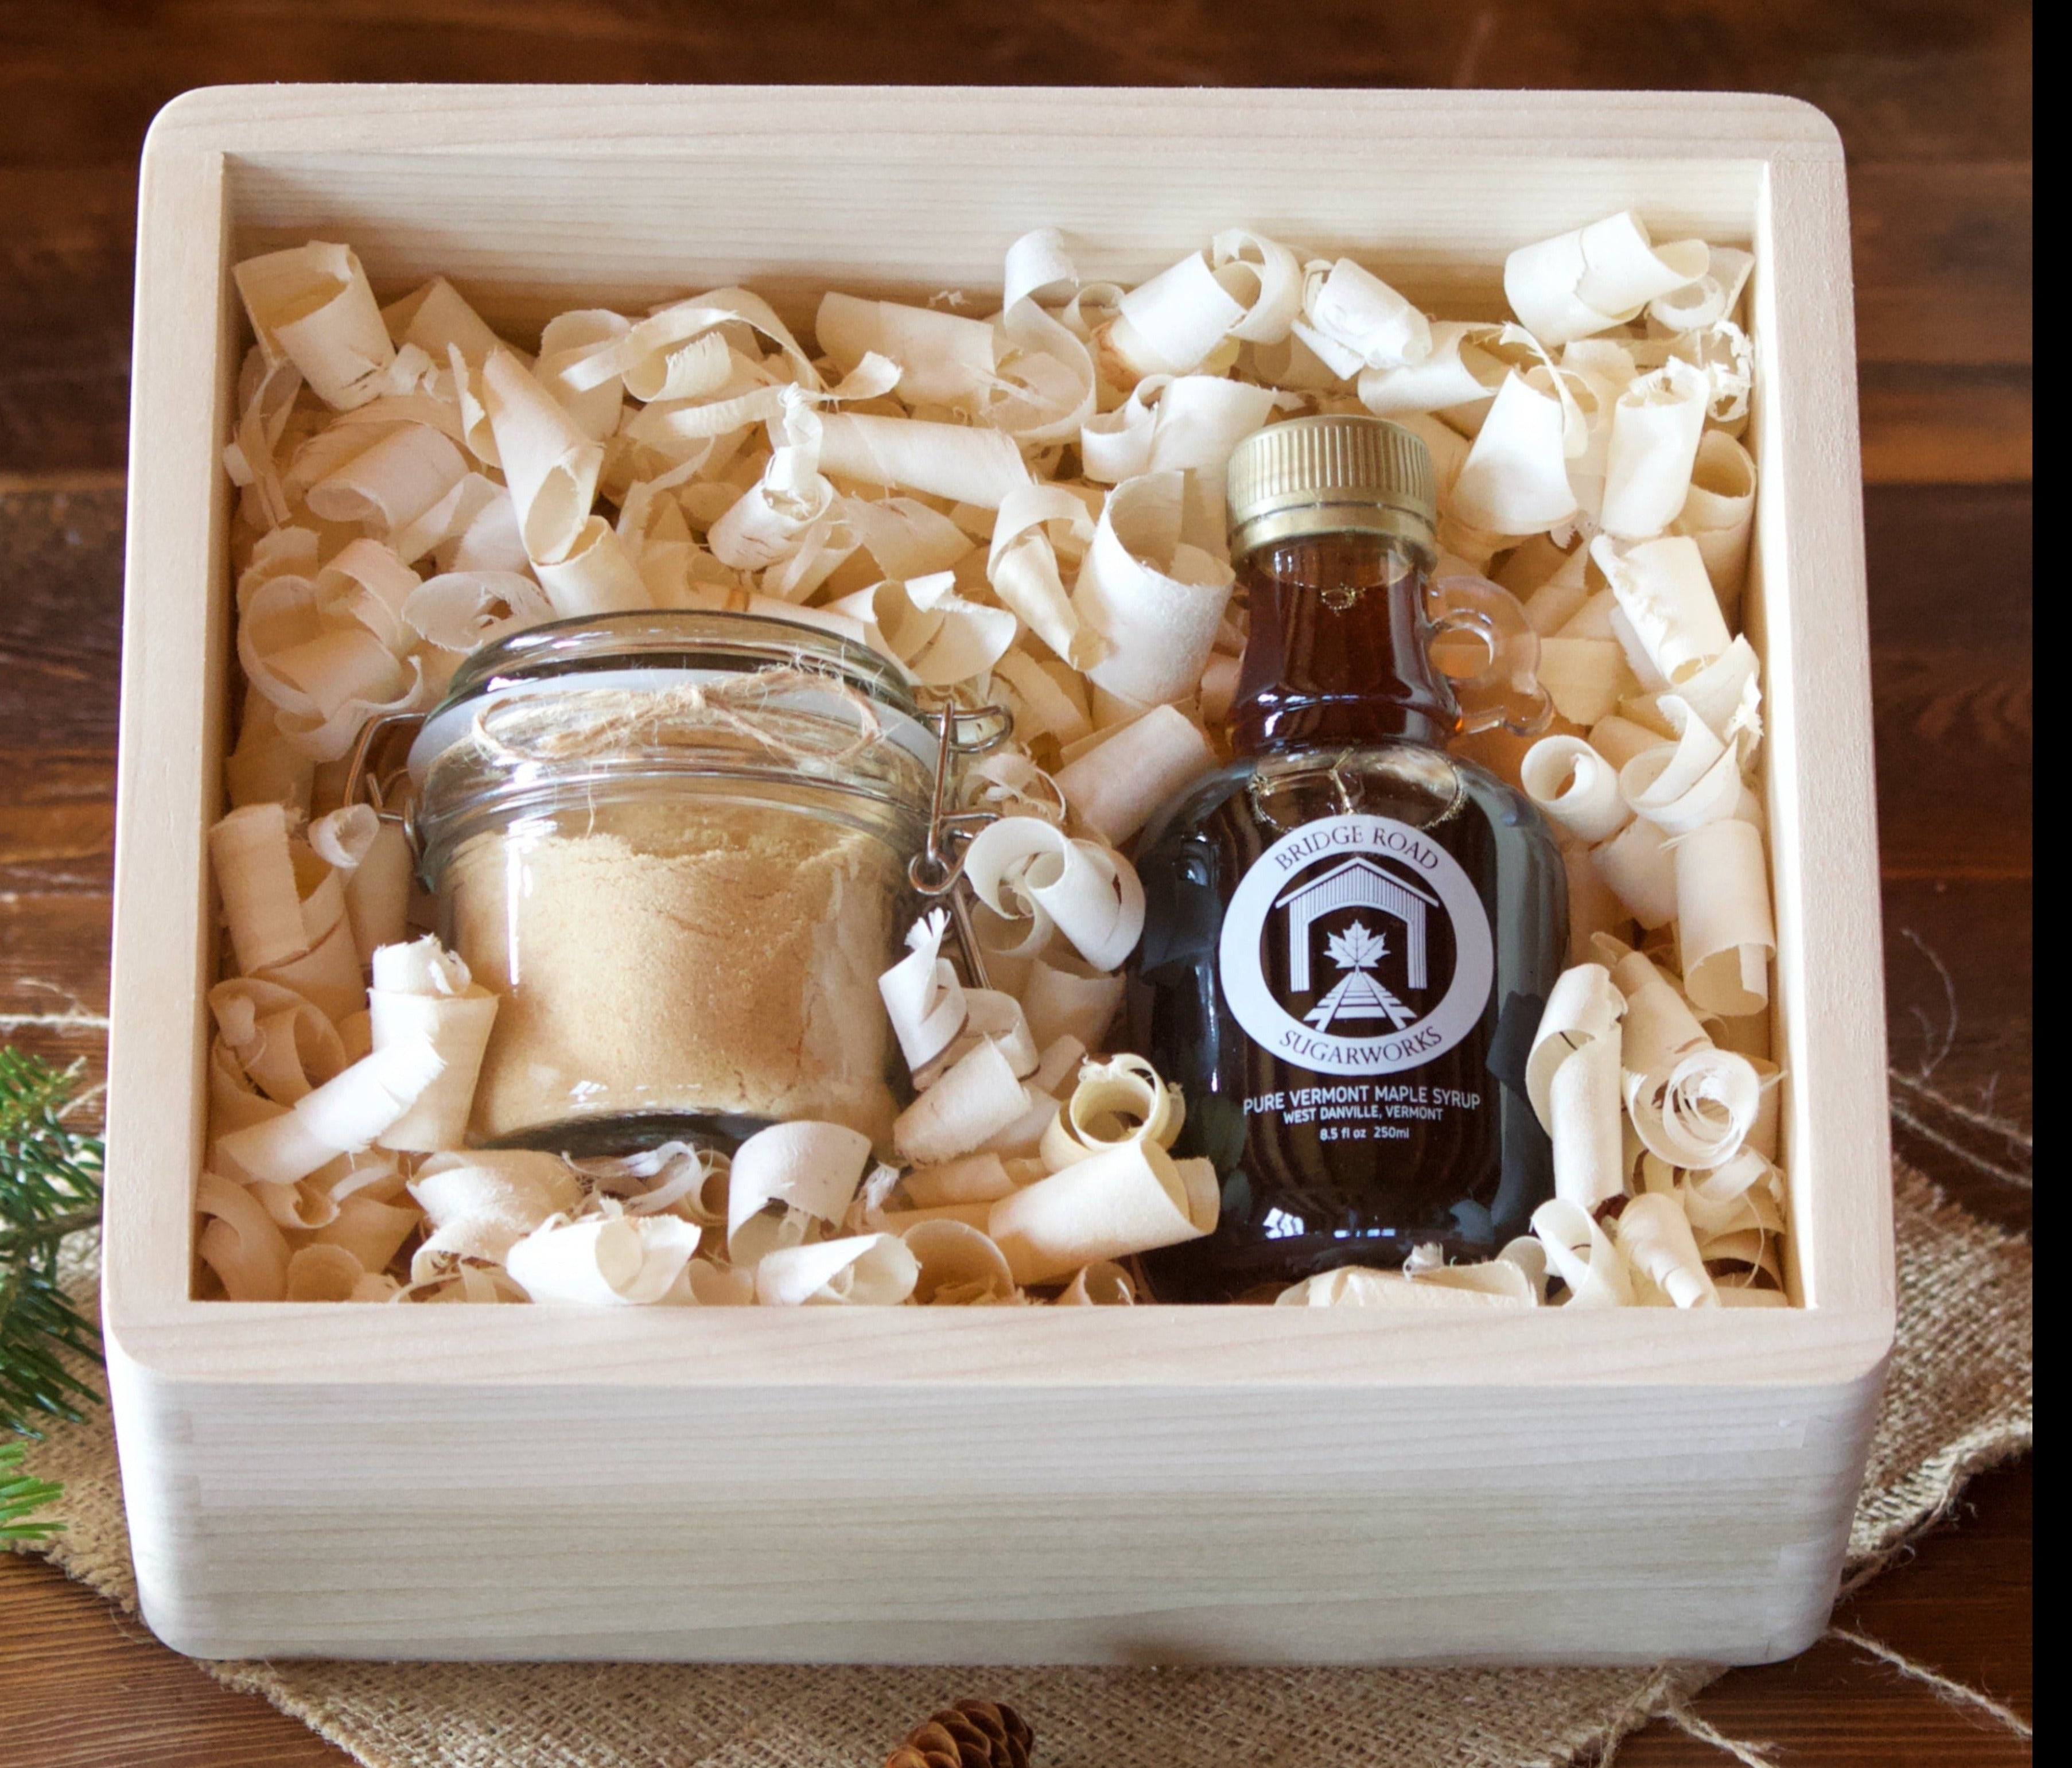 Maple syrup and sugar in a wooden box